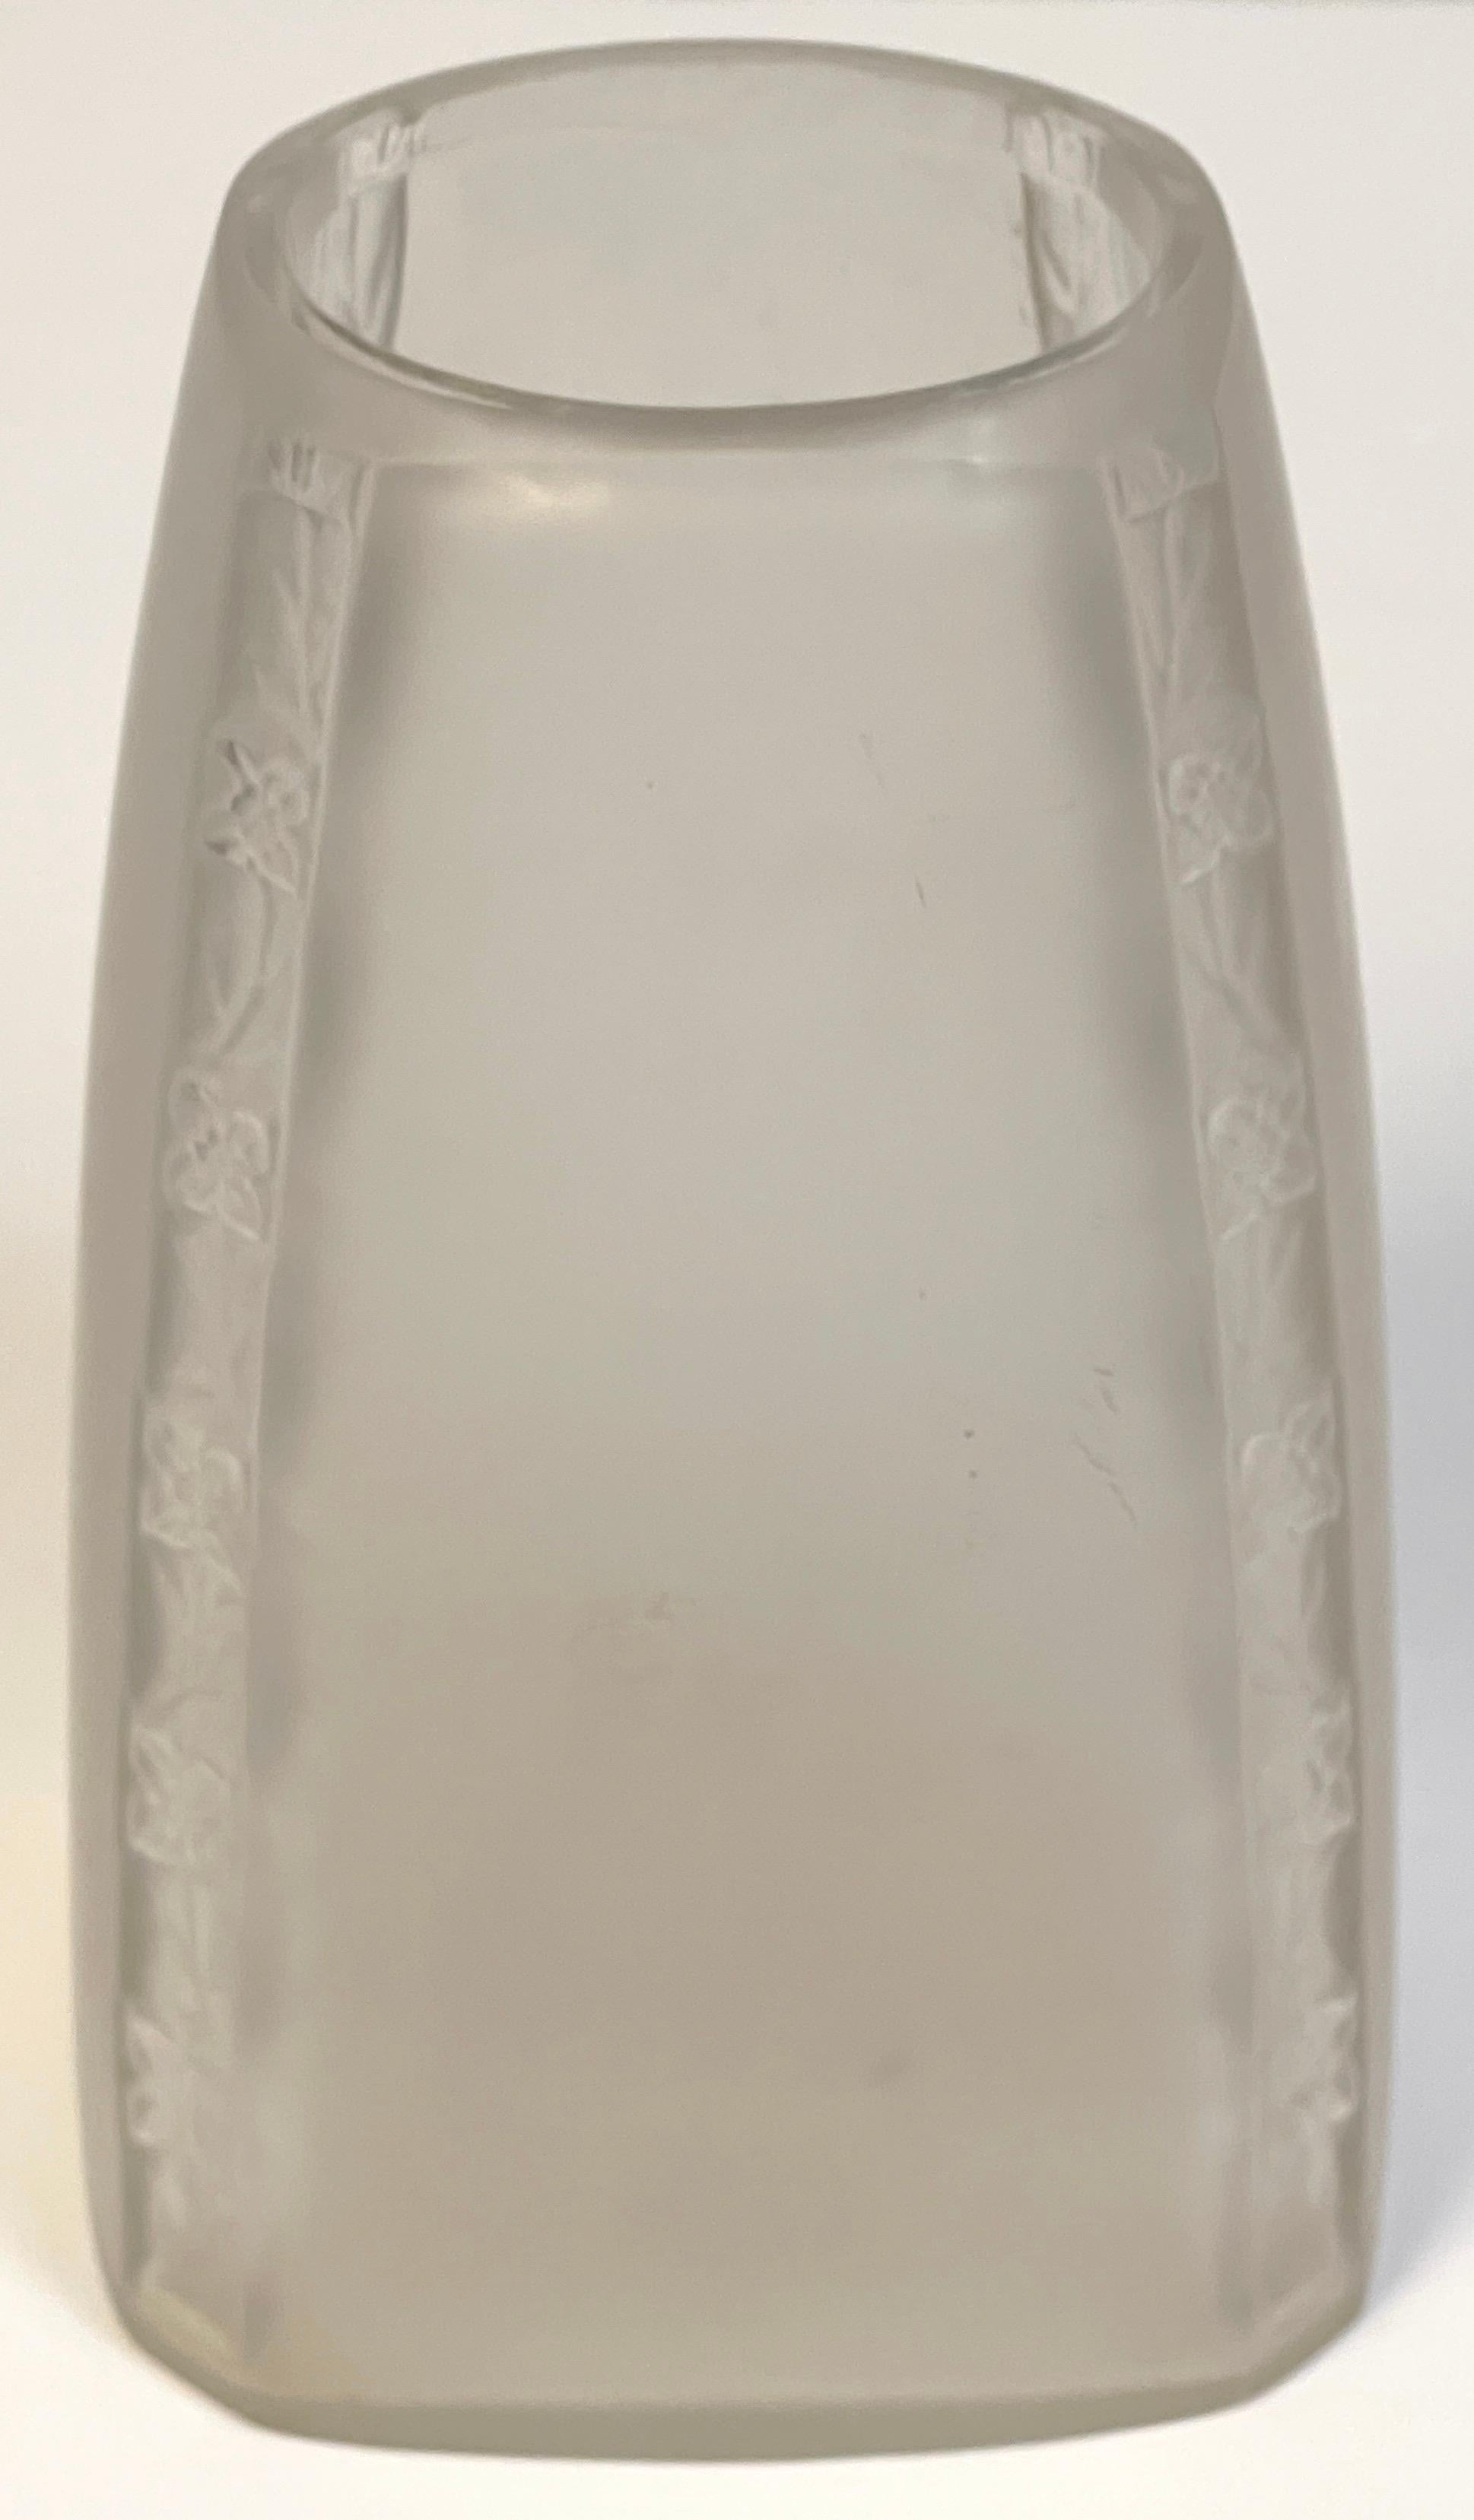 Rene Lalique Art Deco Glass Vase
France, Circa 1920s

A unique period subtle work by Rene Lalique, of square tapering form, with four flowerhead and vine columns at each corner. Signed with early 'LALIAQUE' bold all capital lettered signature.   

